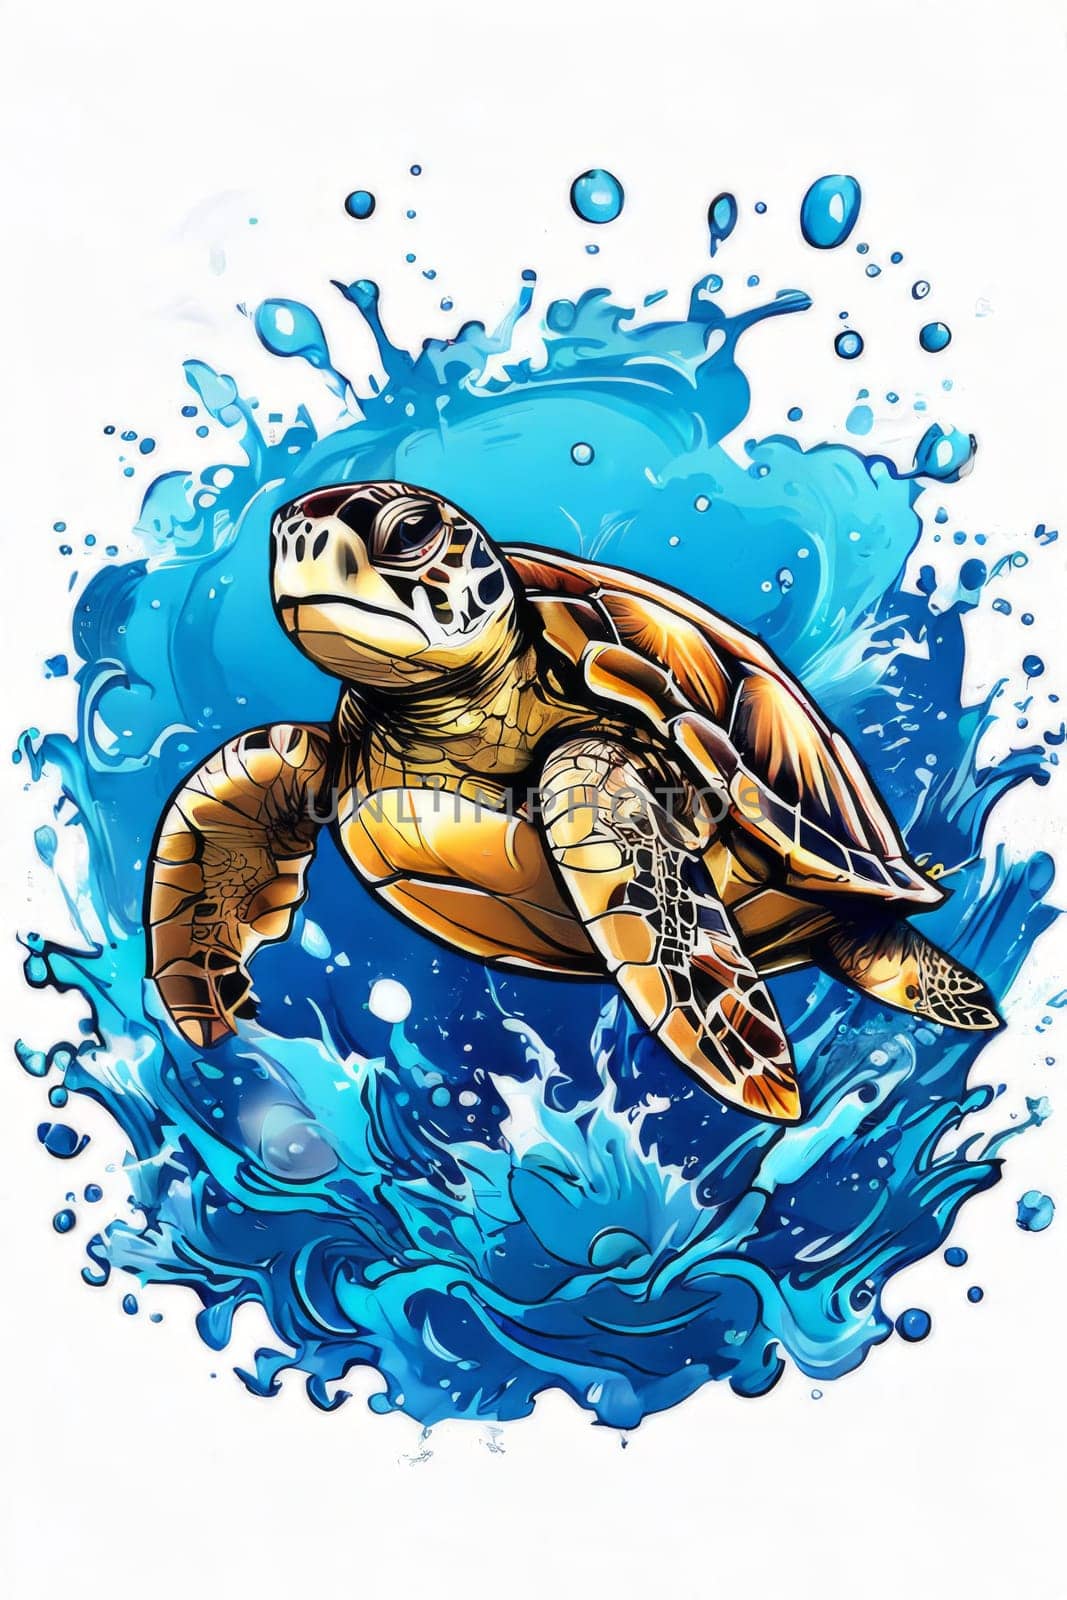 Turtle swimming in ocean, peacefully navigates its underwater world. For Tshirt design, fashion, clothing design, posters, postcards, other merchandise with marine theme, childrens books, tourism. by Angelsmoon